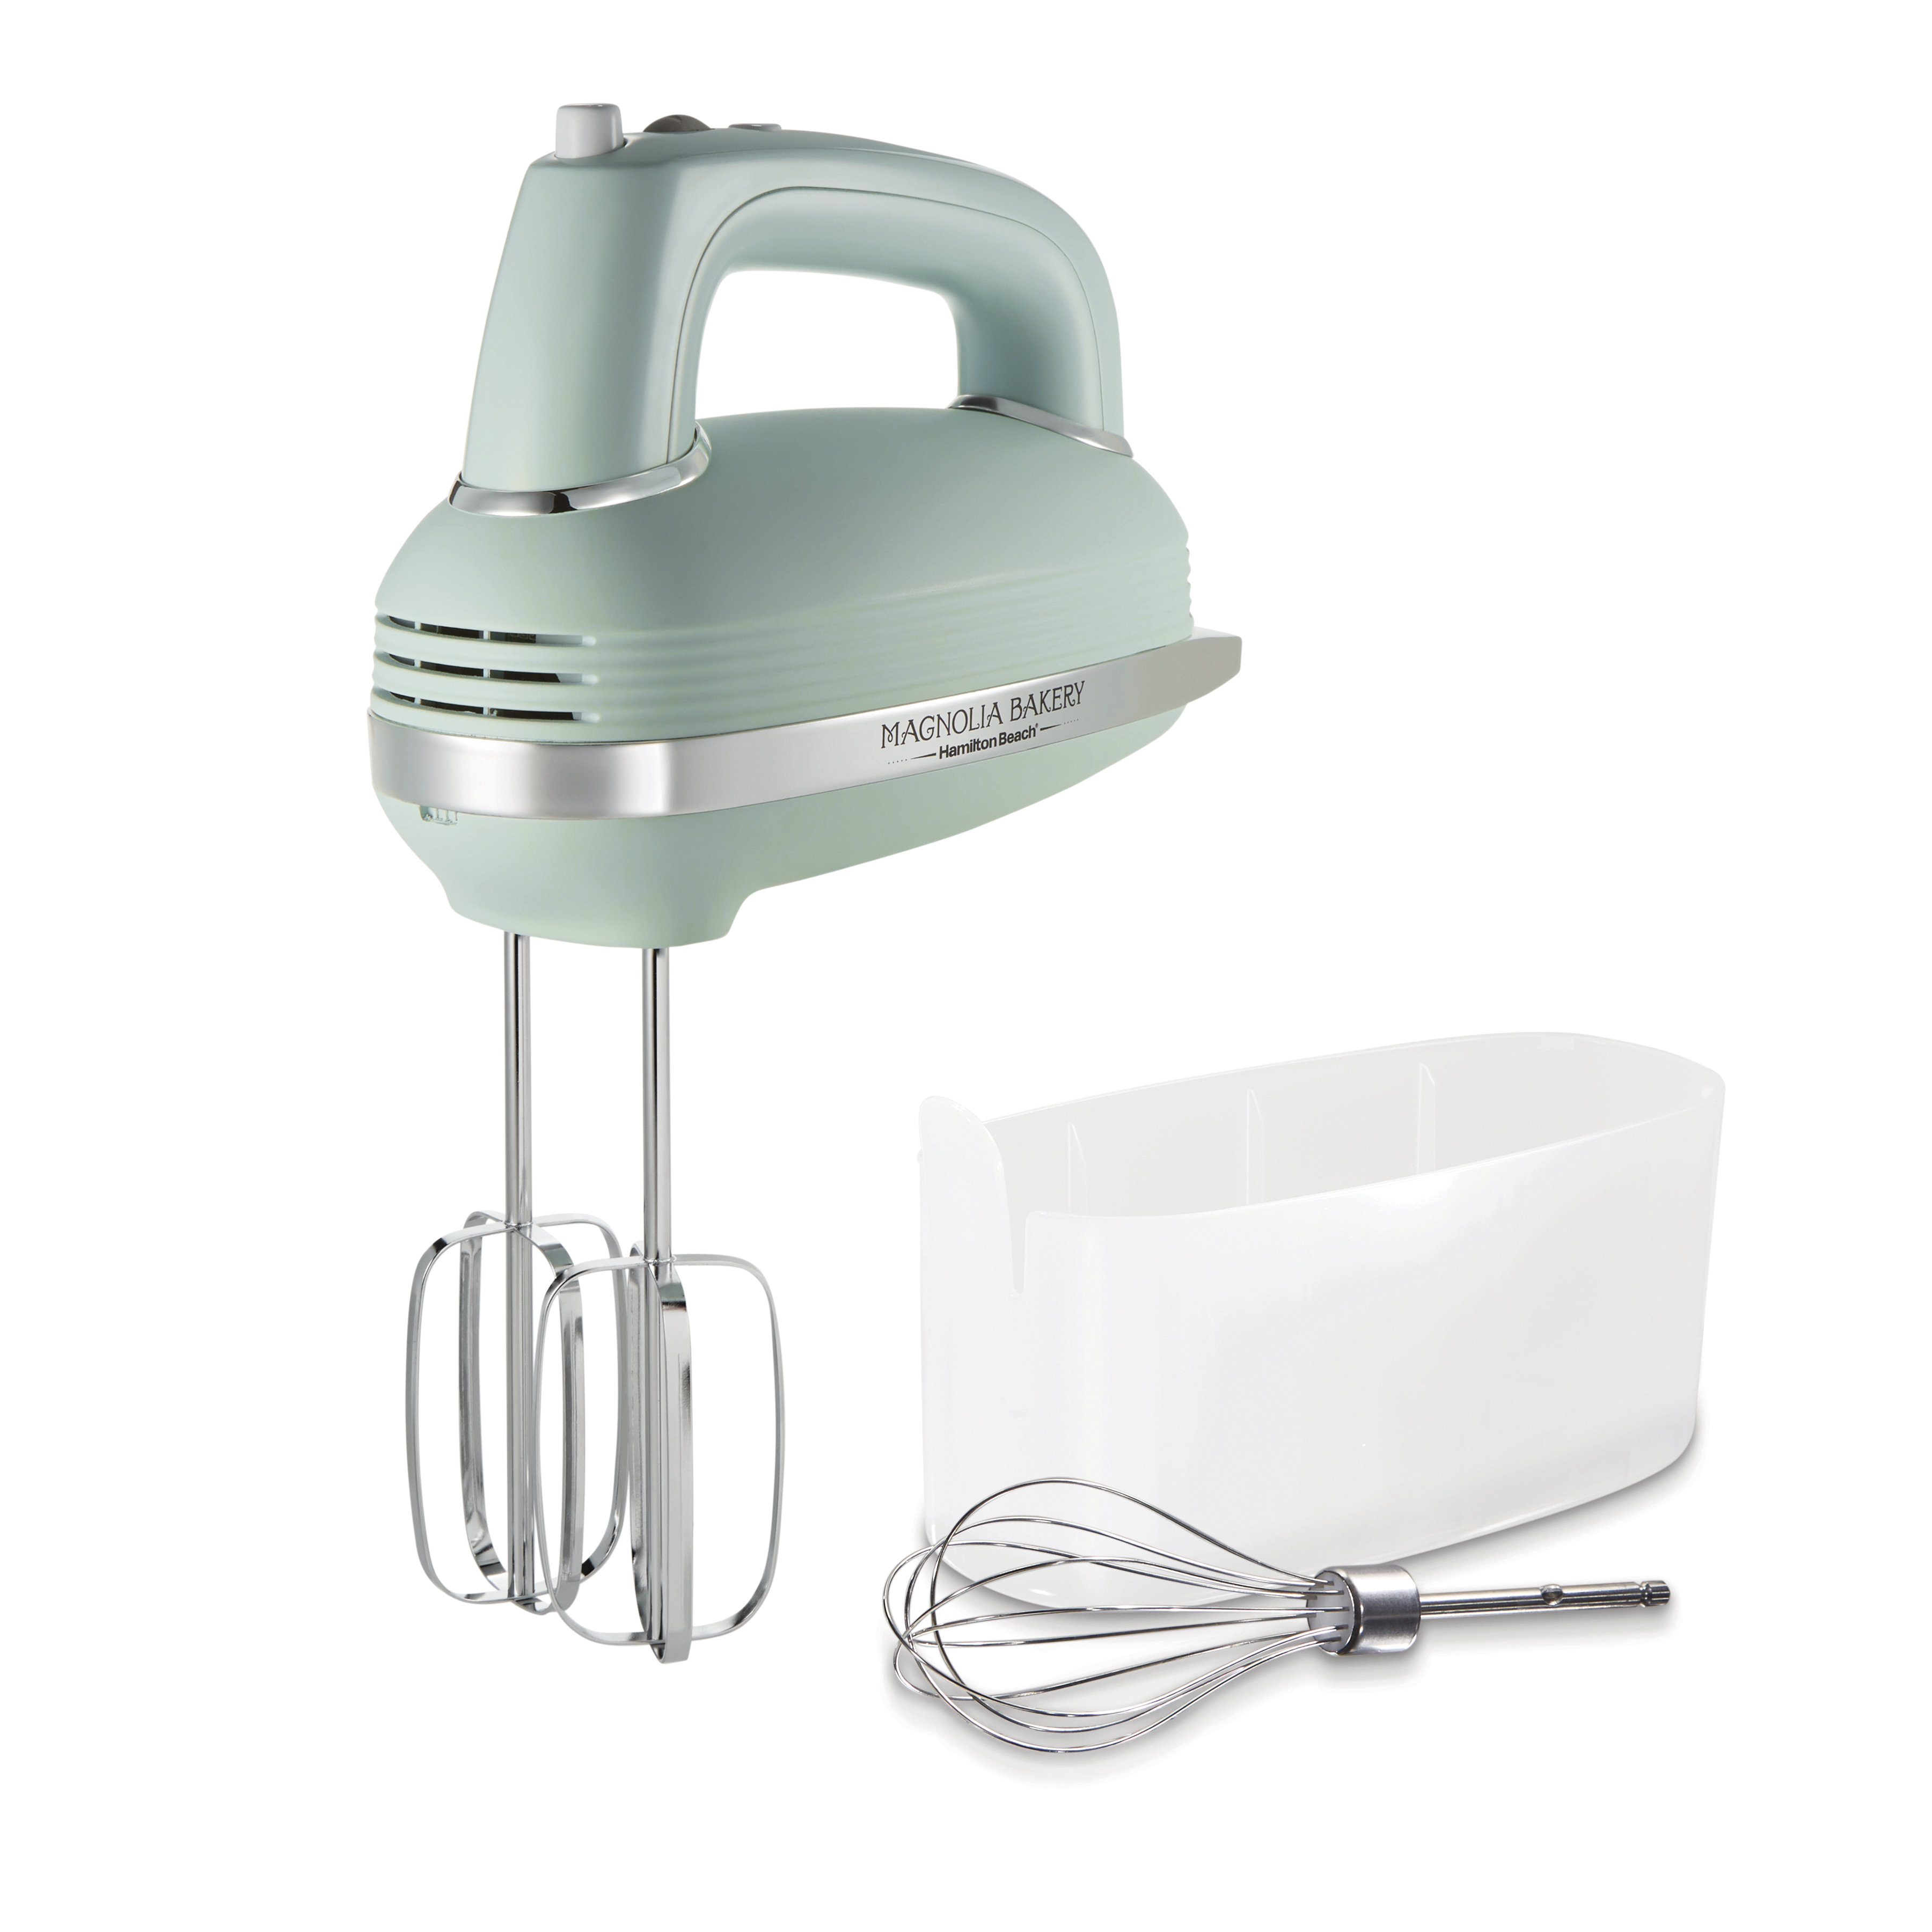 Hamilton Beach 24-in Cord 6-Speed Stainless Steel Hand Mixer in the Hand  Mixers department at